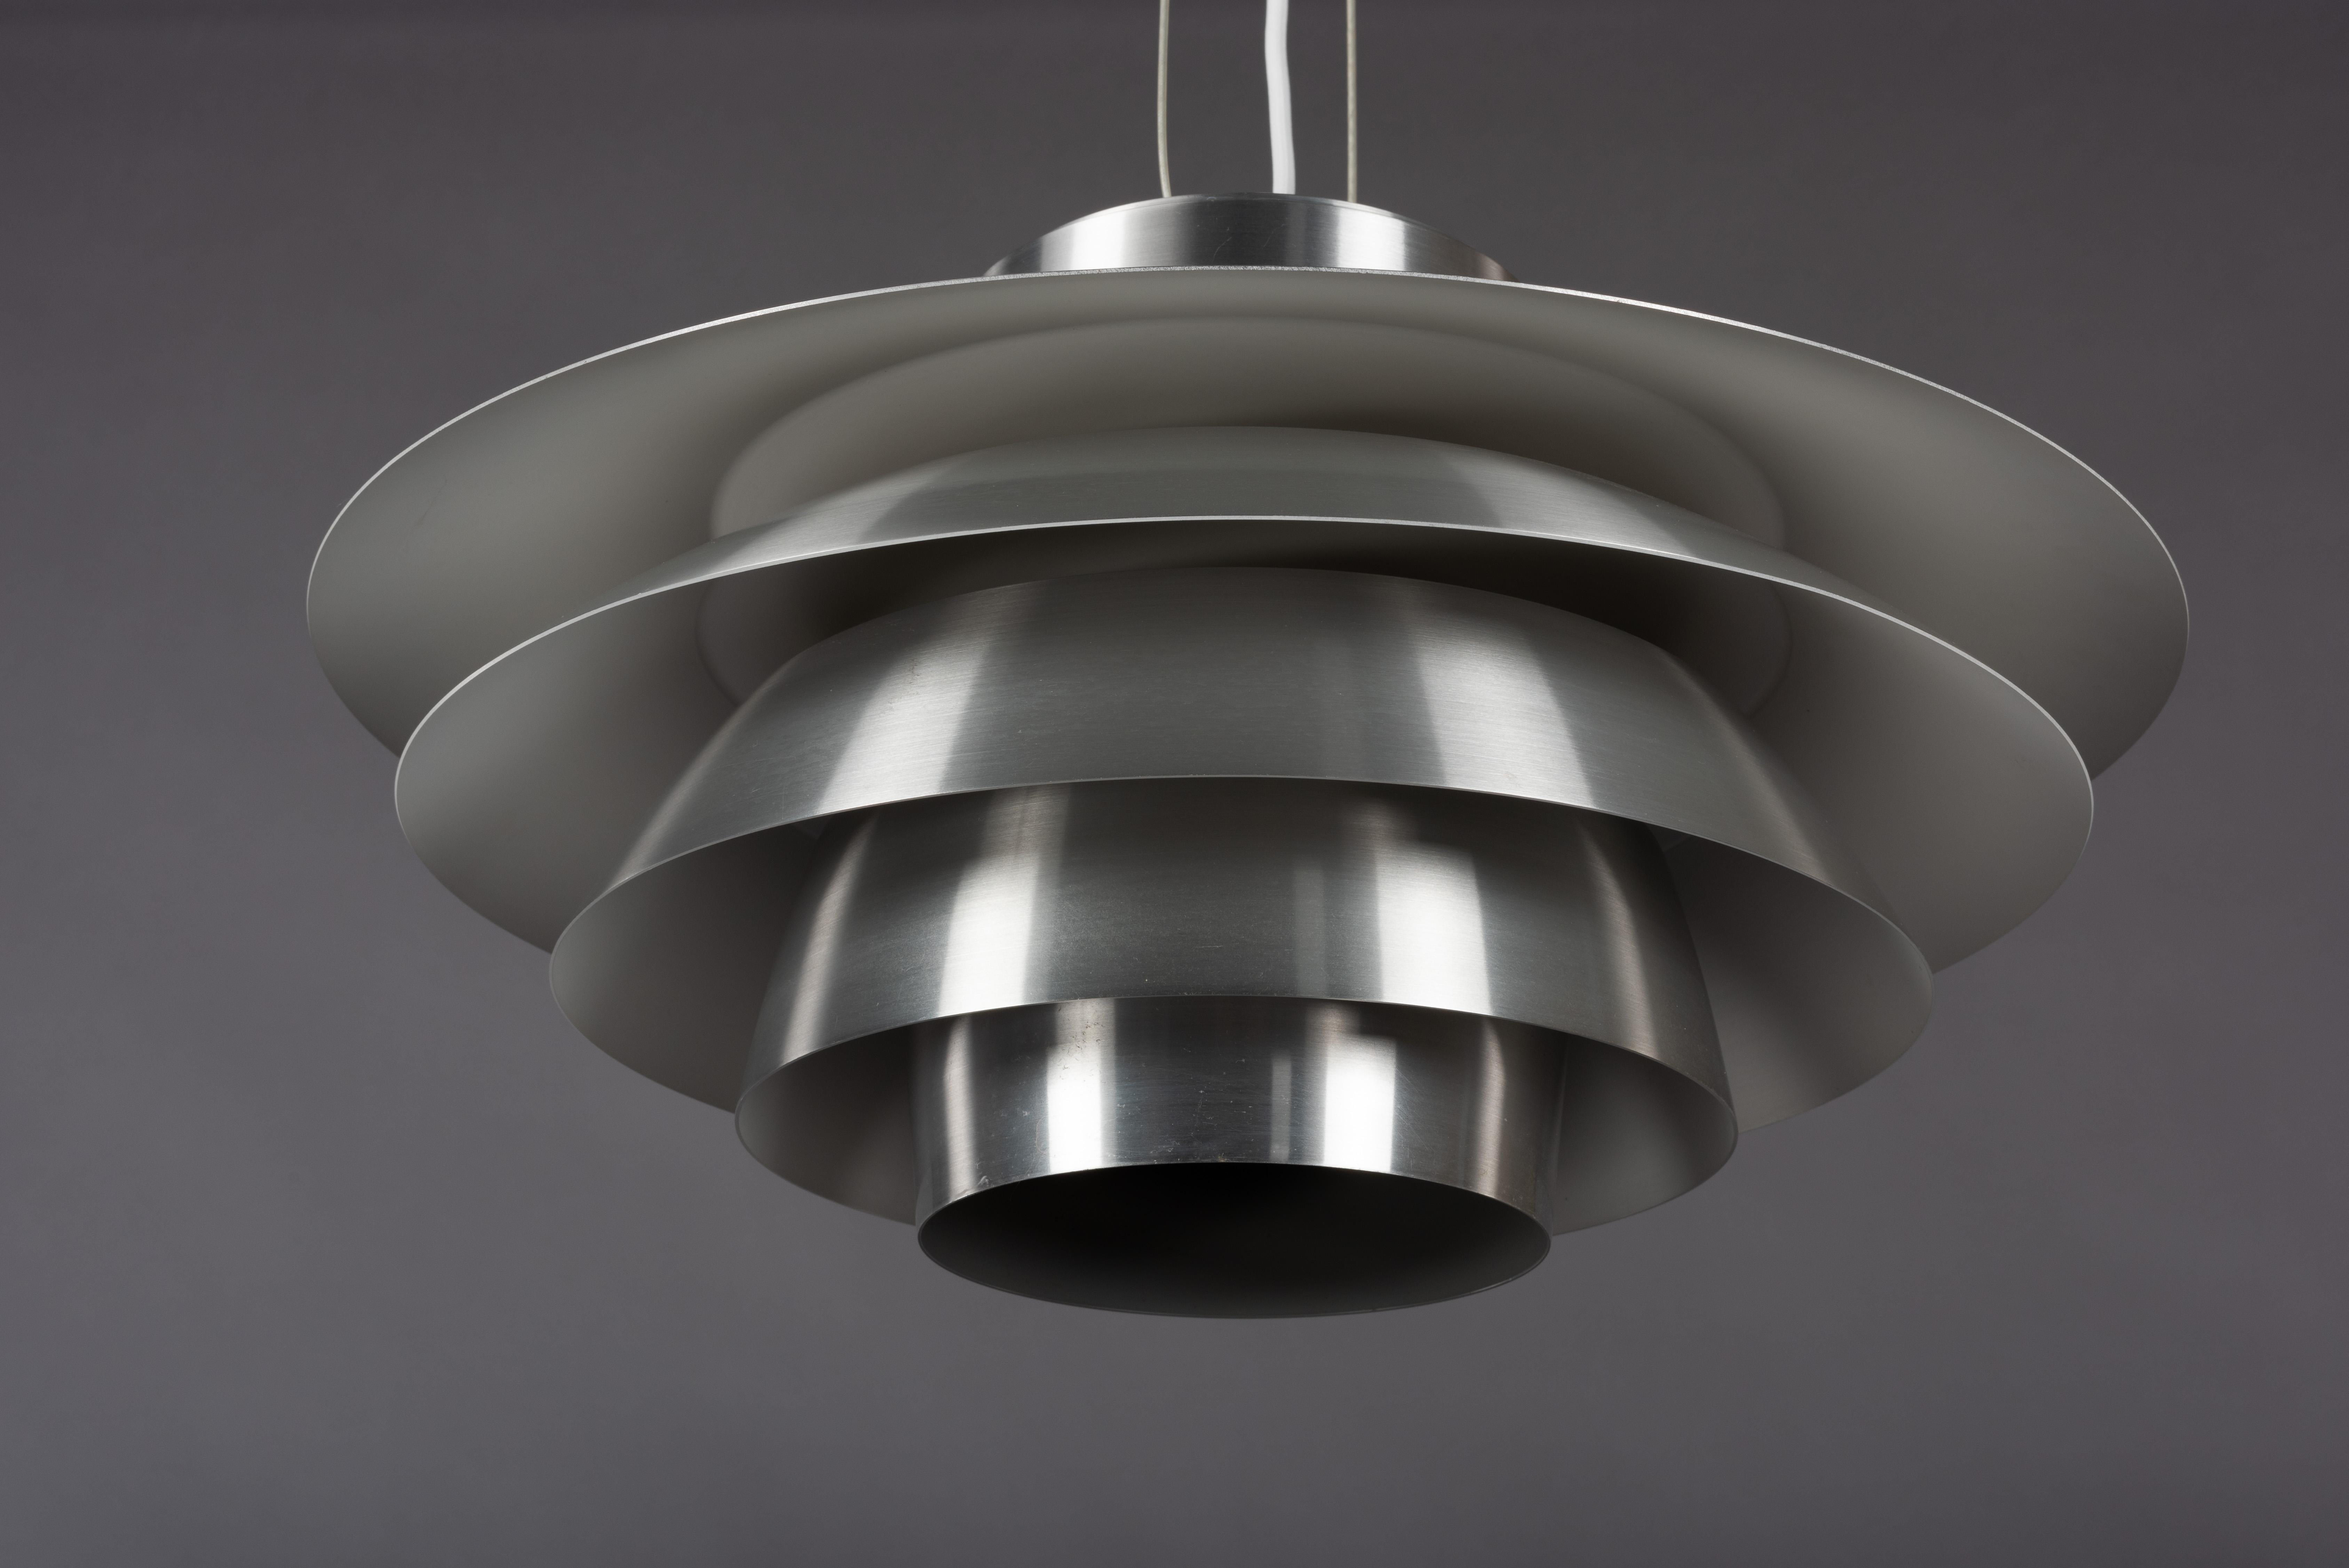 Great looking Svend Middelboe pendant in aluminum. Model Verona, number 42028. This pendant light is produced by Nordisk Solar in Denmark. The lamp is made from aluminum with a white interior. Constructed from tiers of aluminum the light is